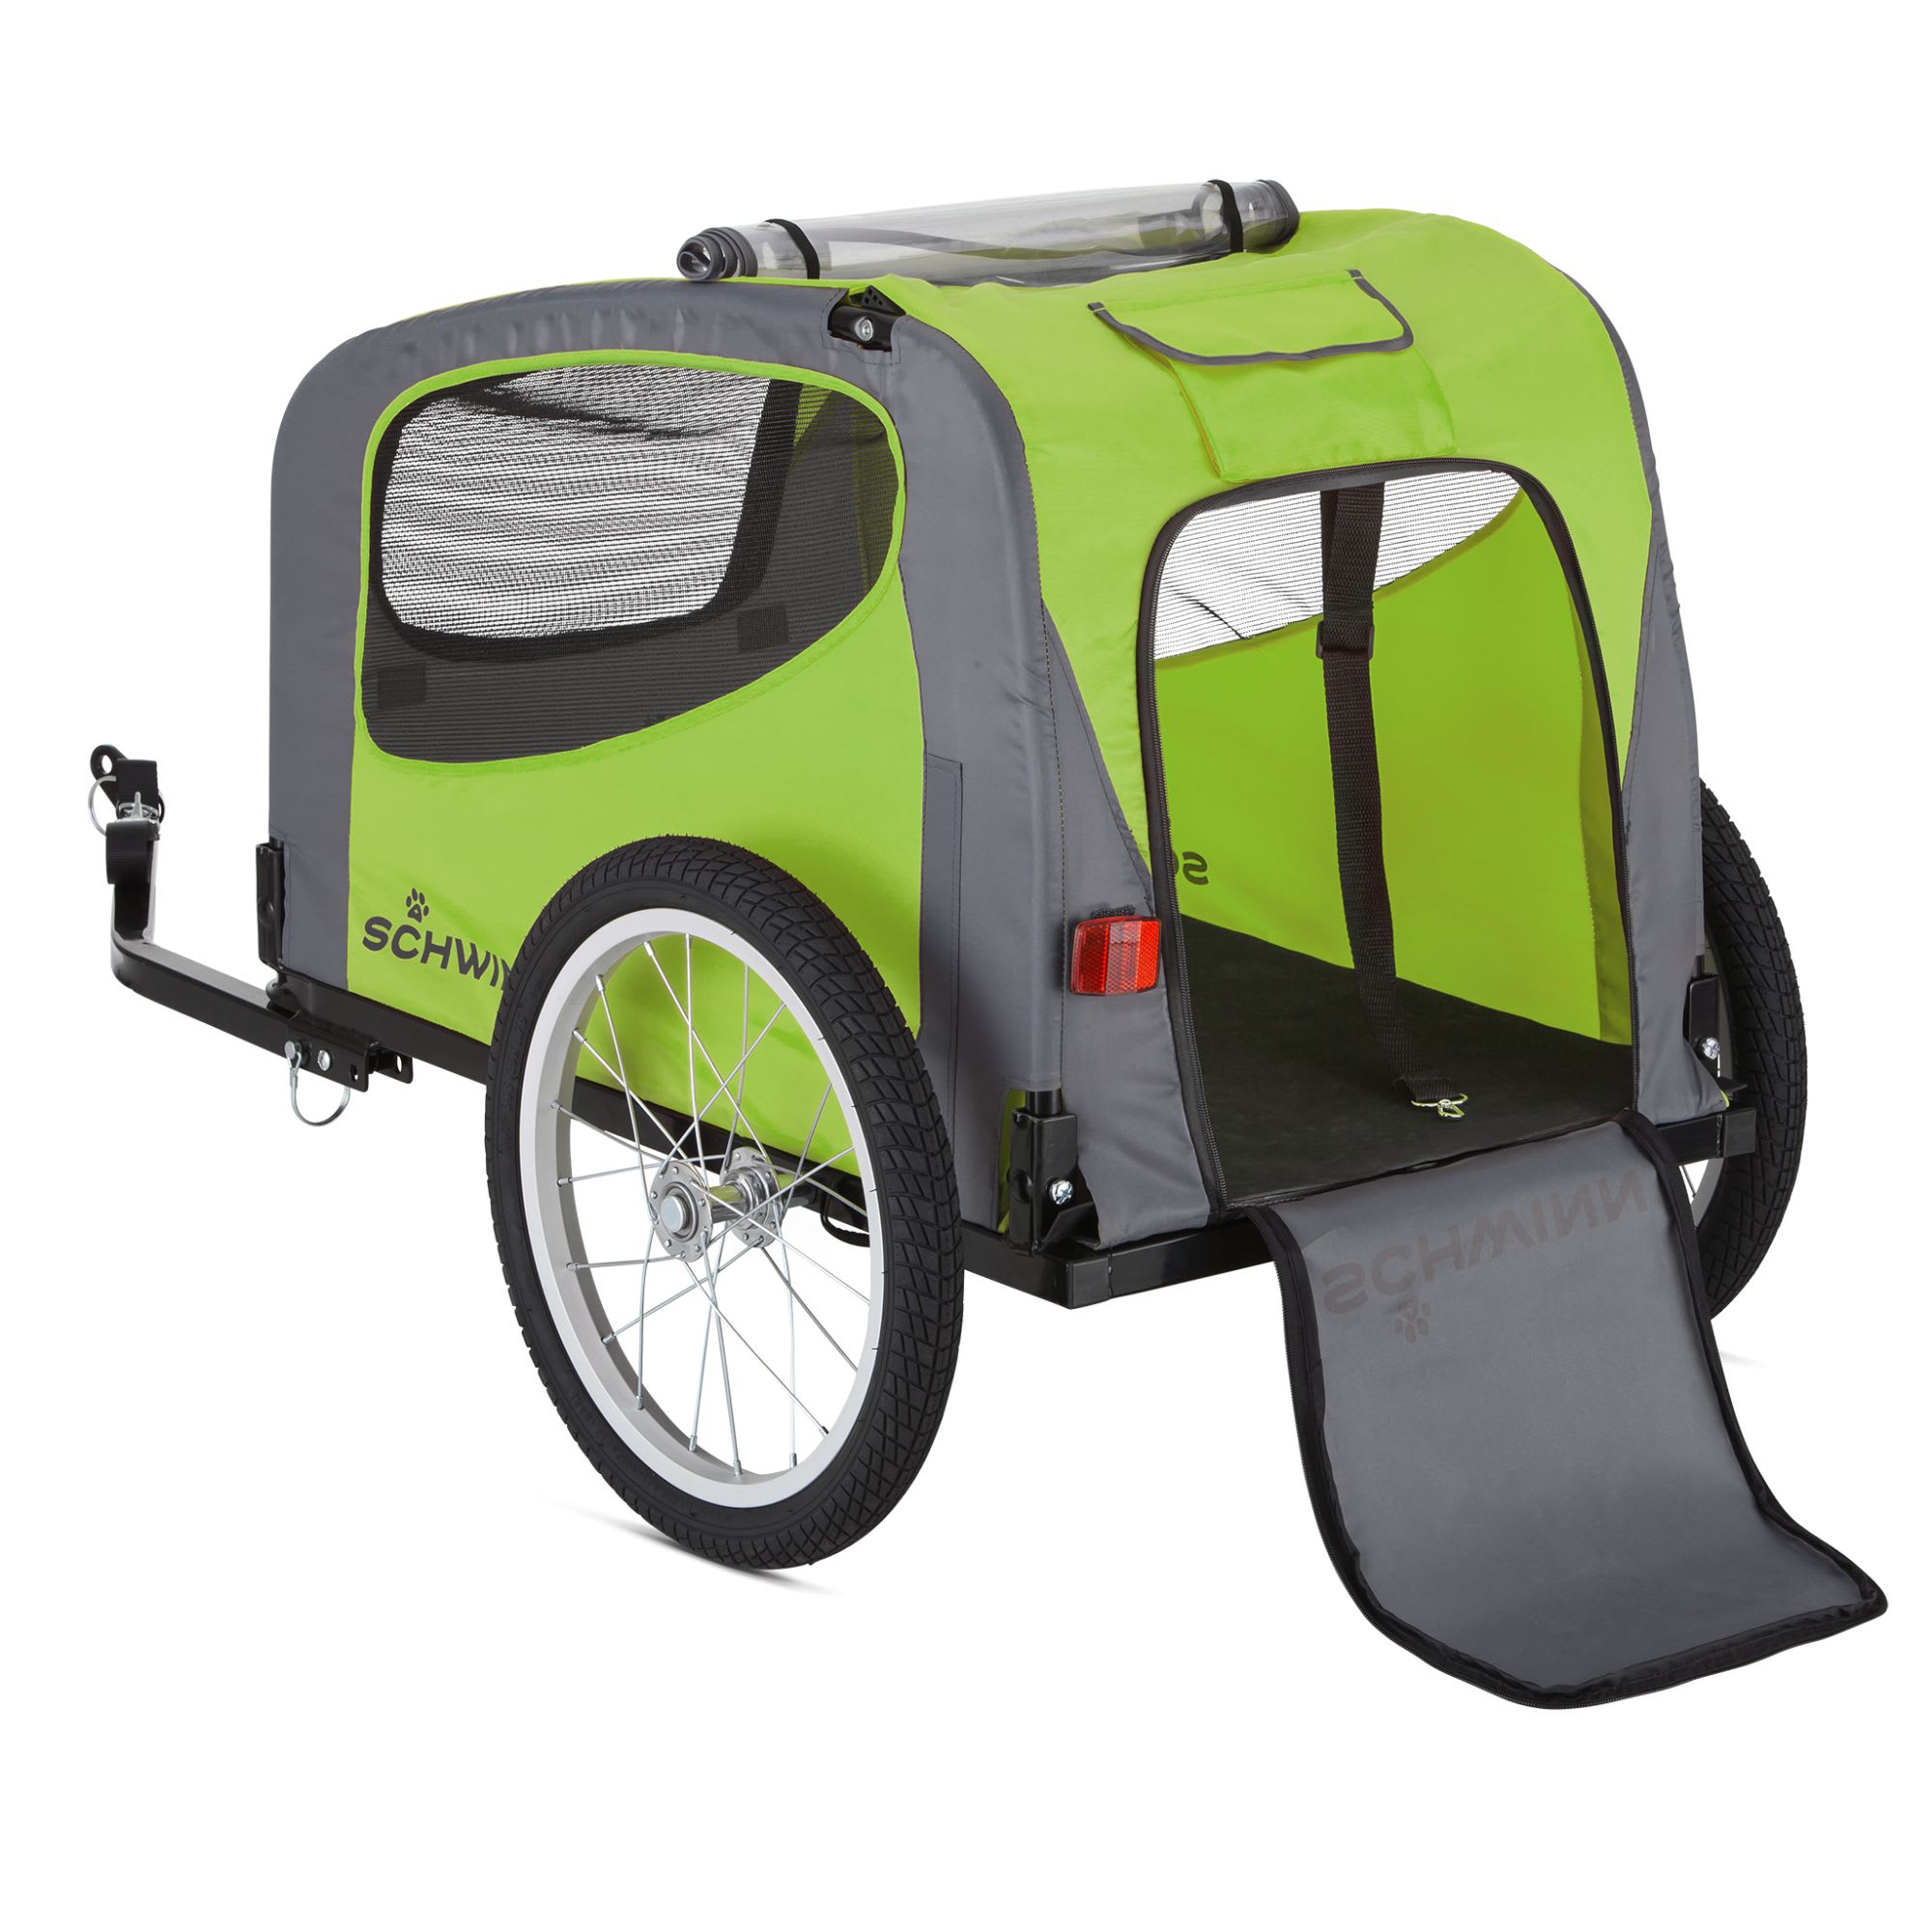 bike buggy for dogs